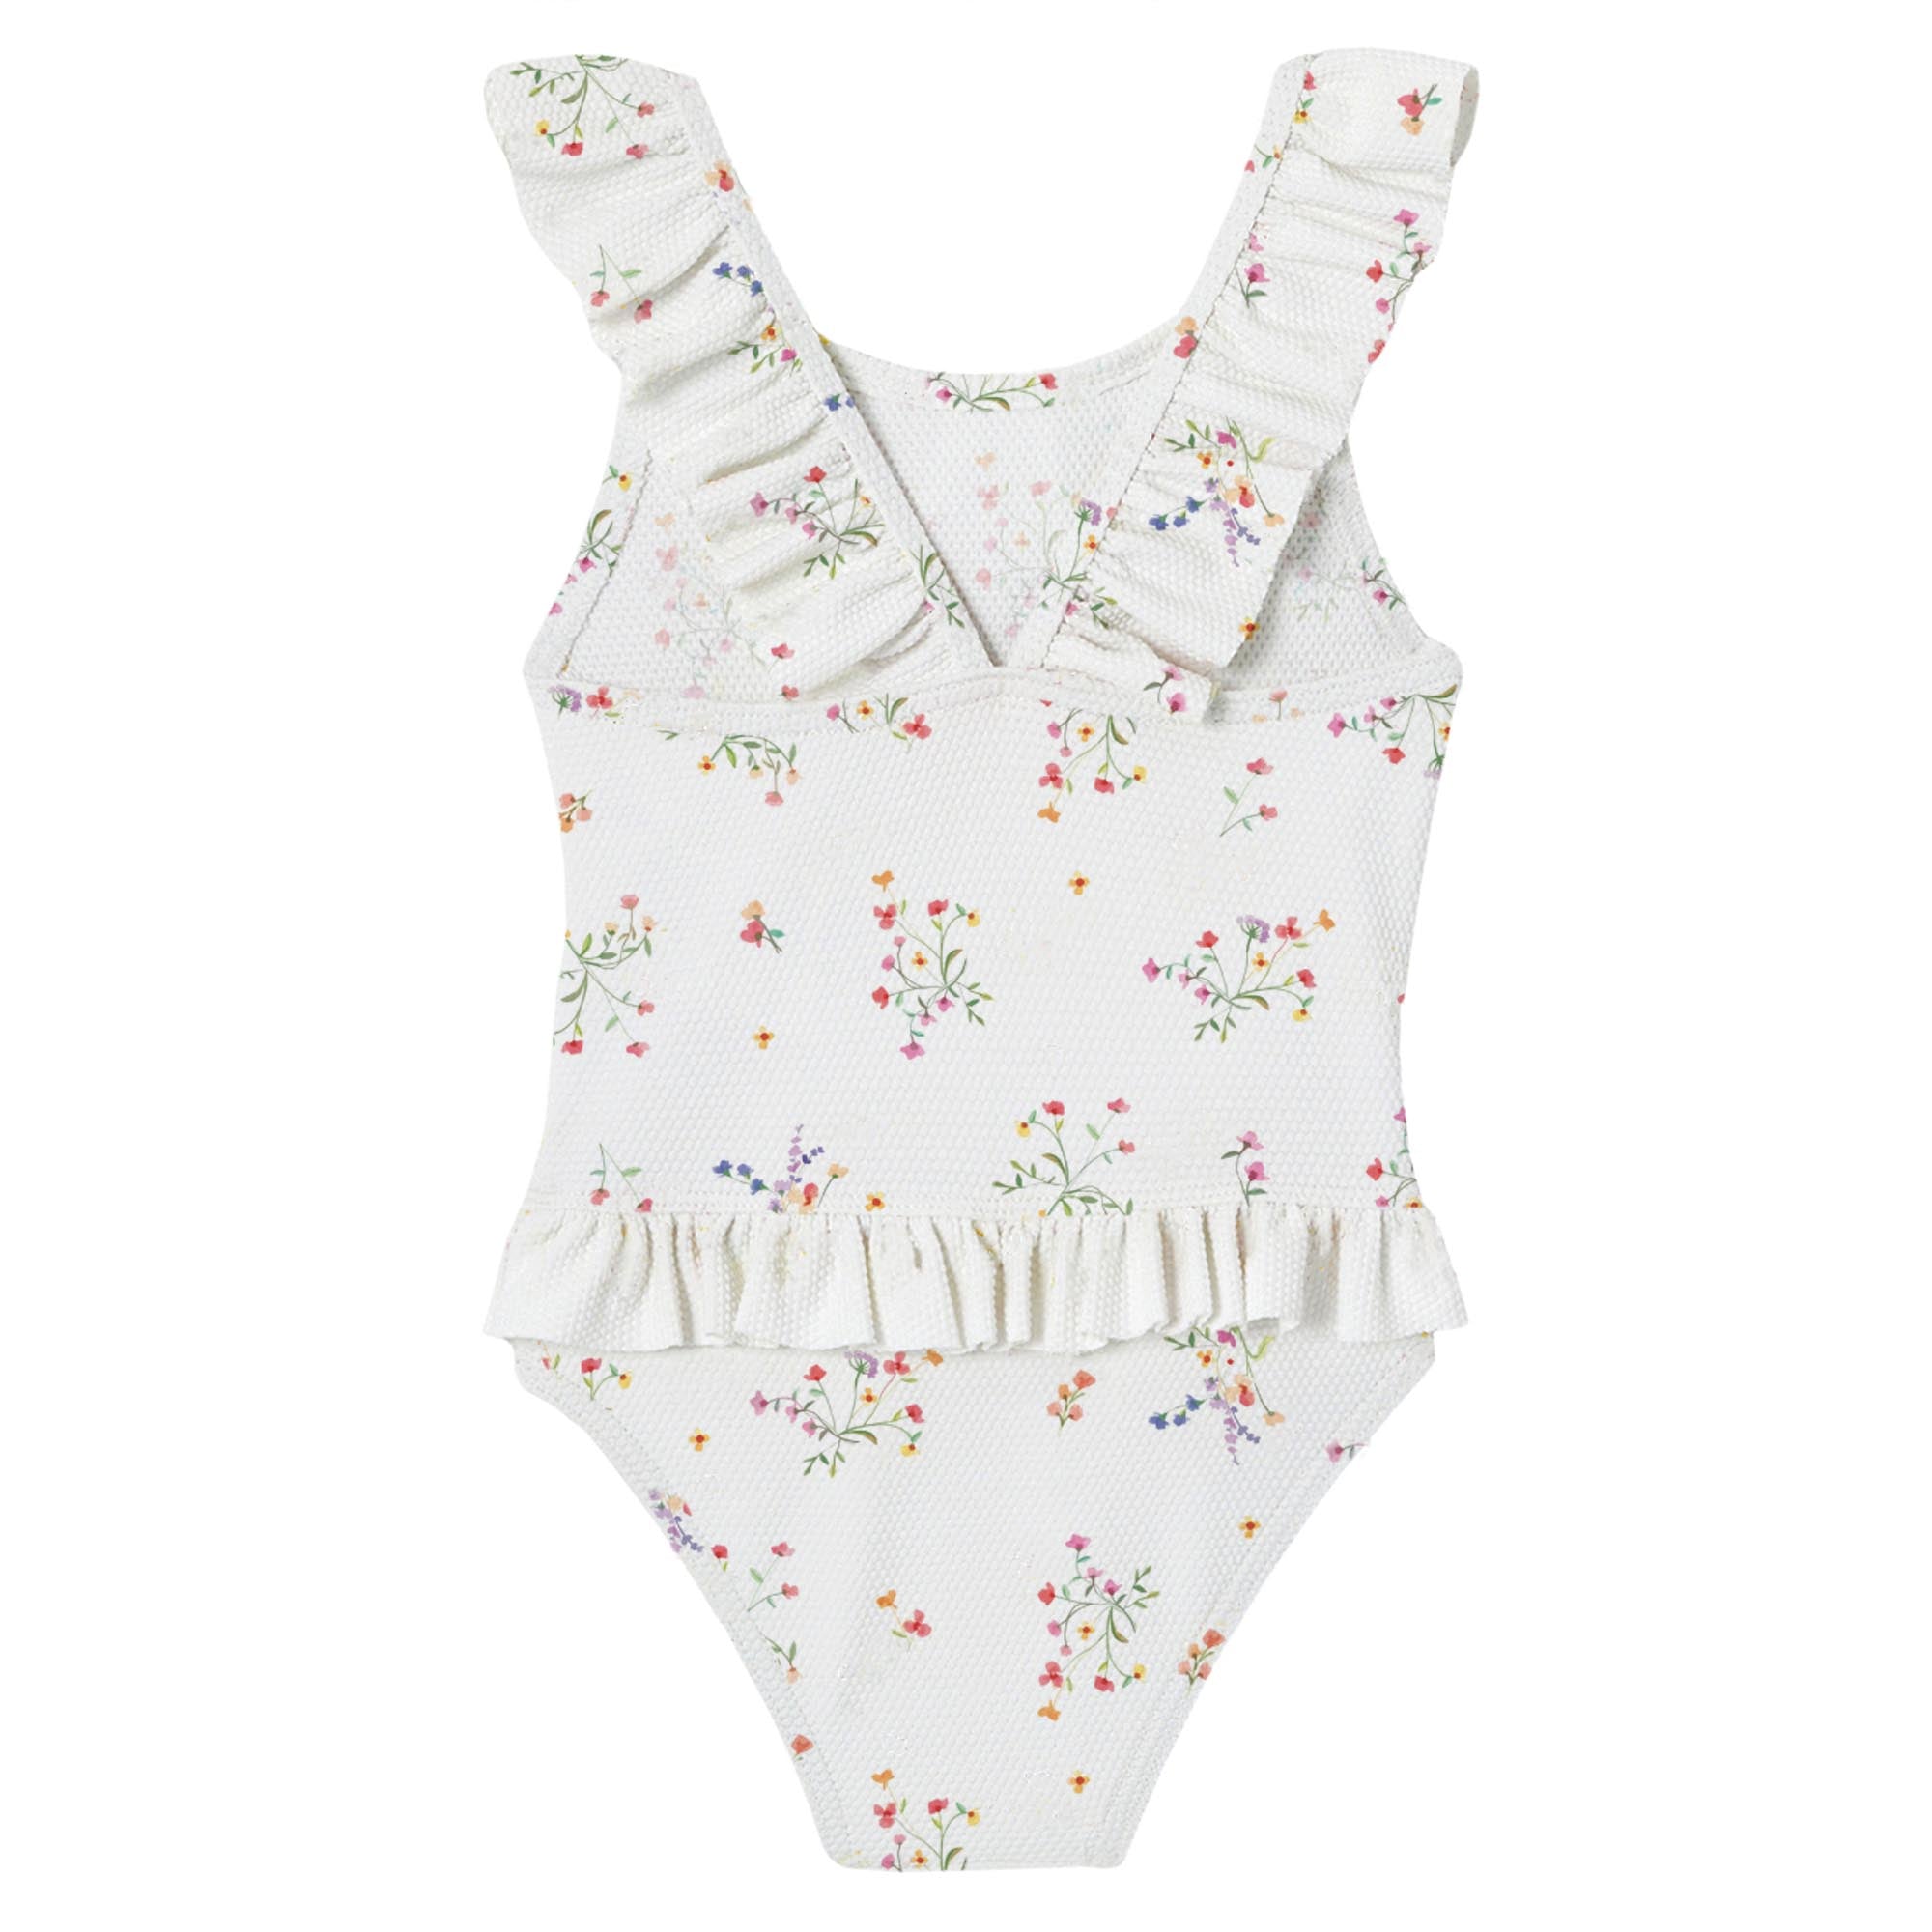 Baby girl's 1-piece swimsuit, floral print